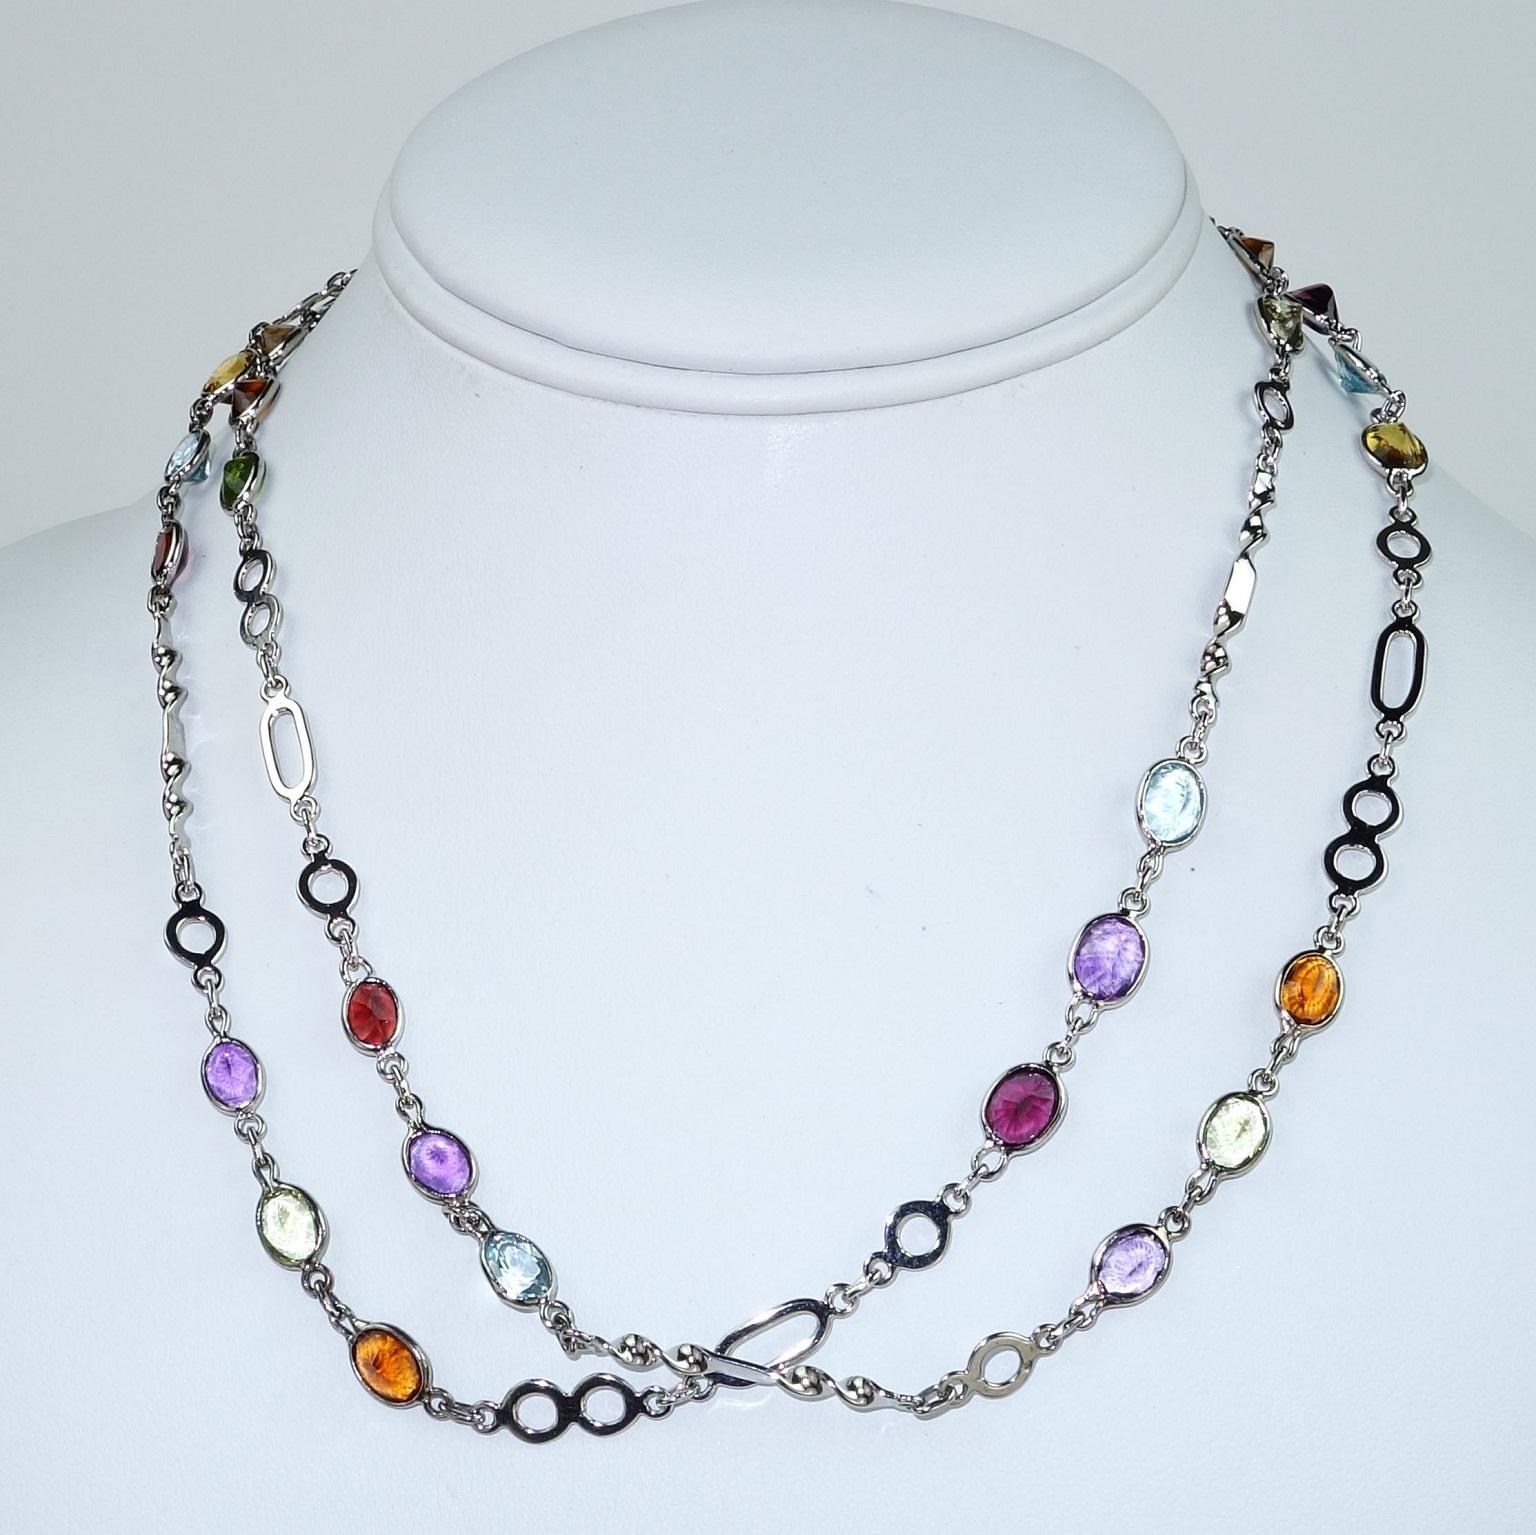 Oval Cut Gemjunky Sterling Silver Chain with Oval Gemstones Necklace